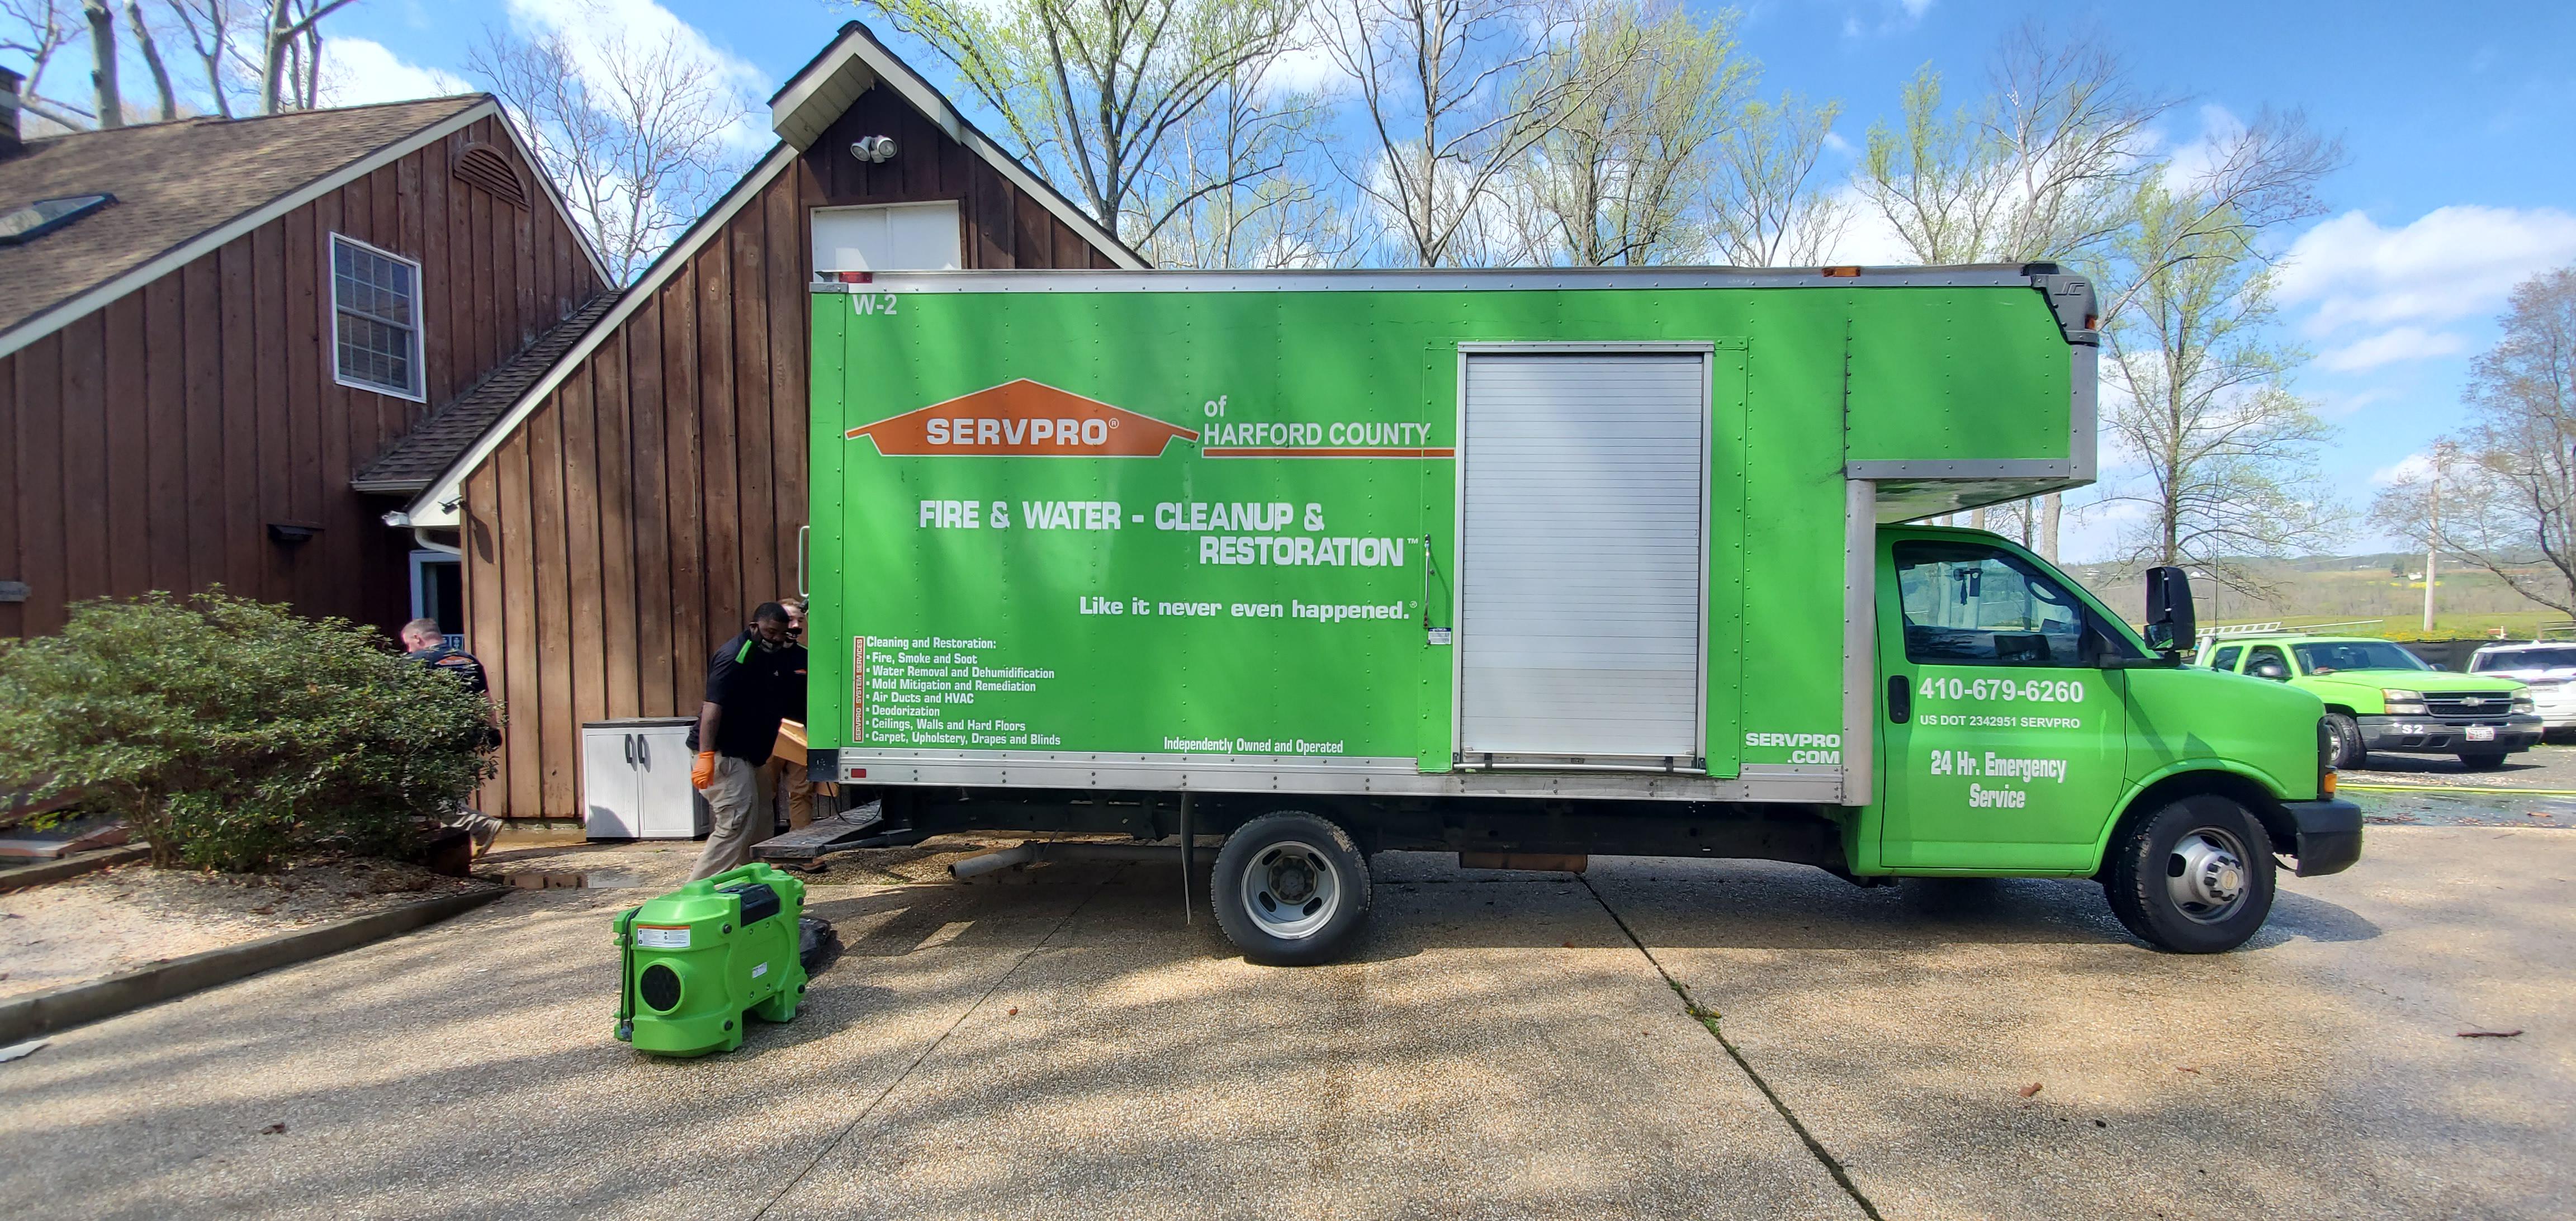 SERVPRO typical Truck